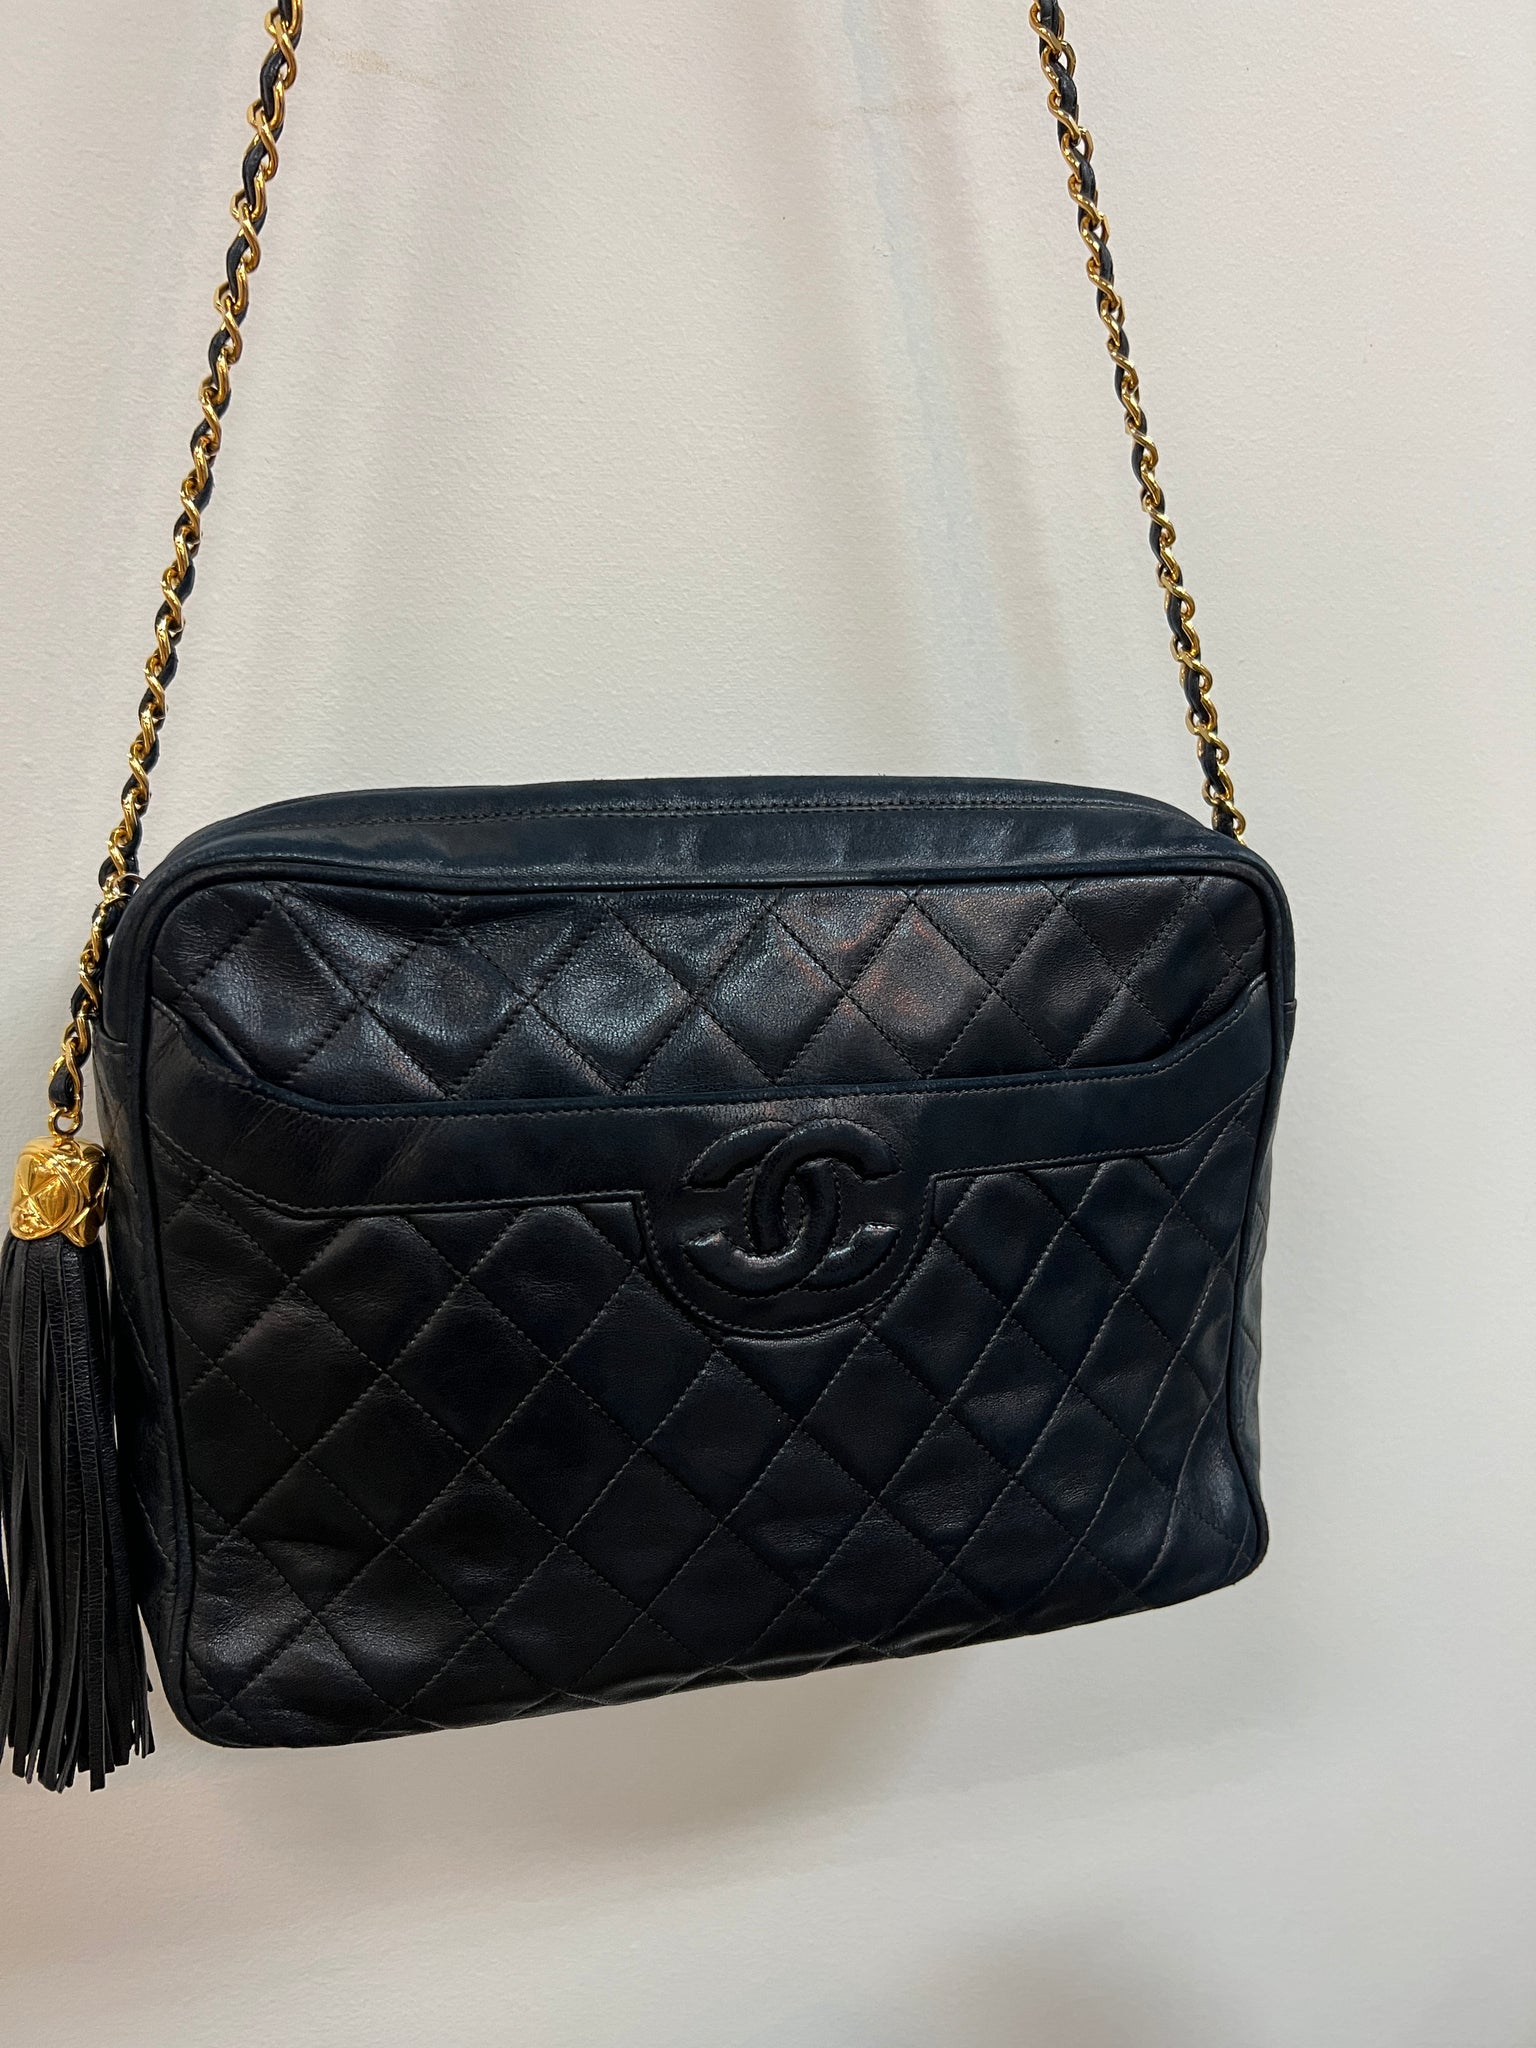 Authentic Chanel Vintage Classic Bag Black Lambskin Leather for Sale in Las  Vegas, NV - OfferUp